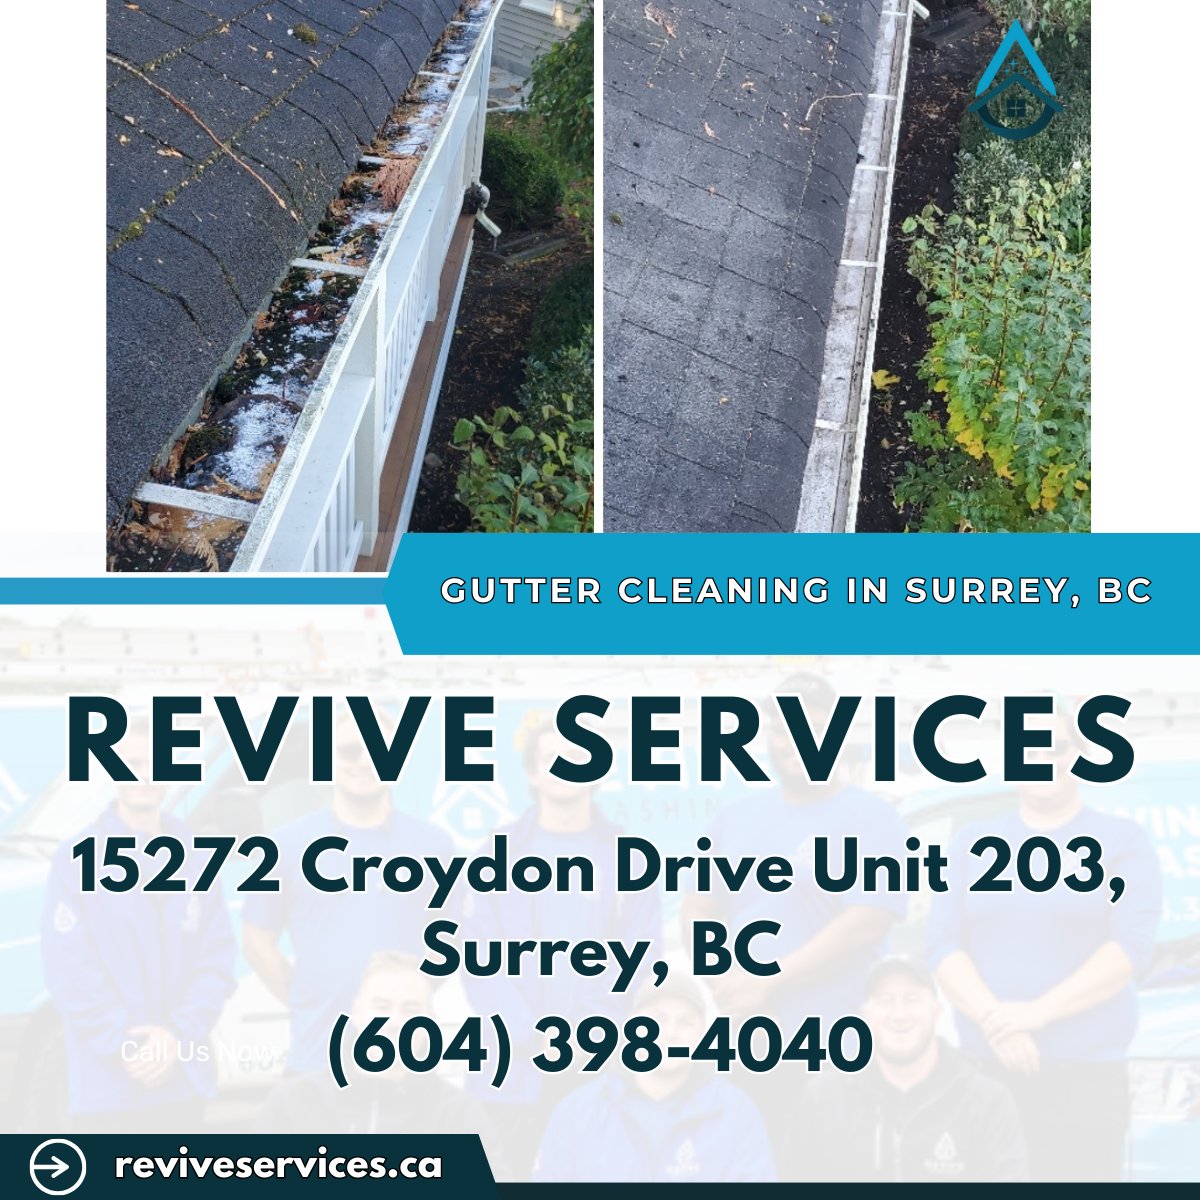 Gutter Cleaning in Surrey, BC - Revive Services

reviveservices.ca/services/gutte…

Revive Services
15272 Croydon Dr #203
Surrey, BC V3S 0Z5, Canada
604-398-4040

google.com/maps/place/Rev…

#GutterCleaning #GutterCleaningSurreyBC